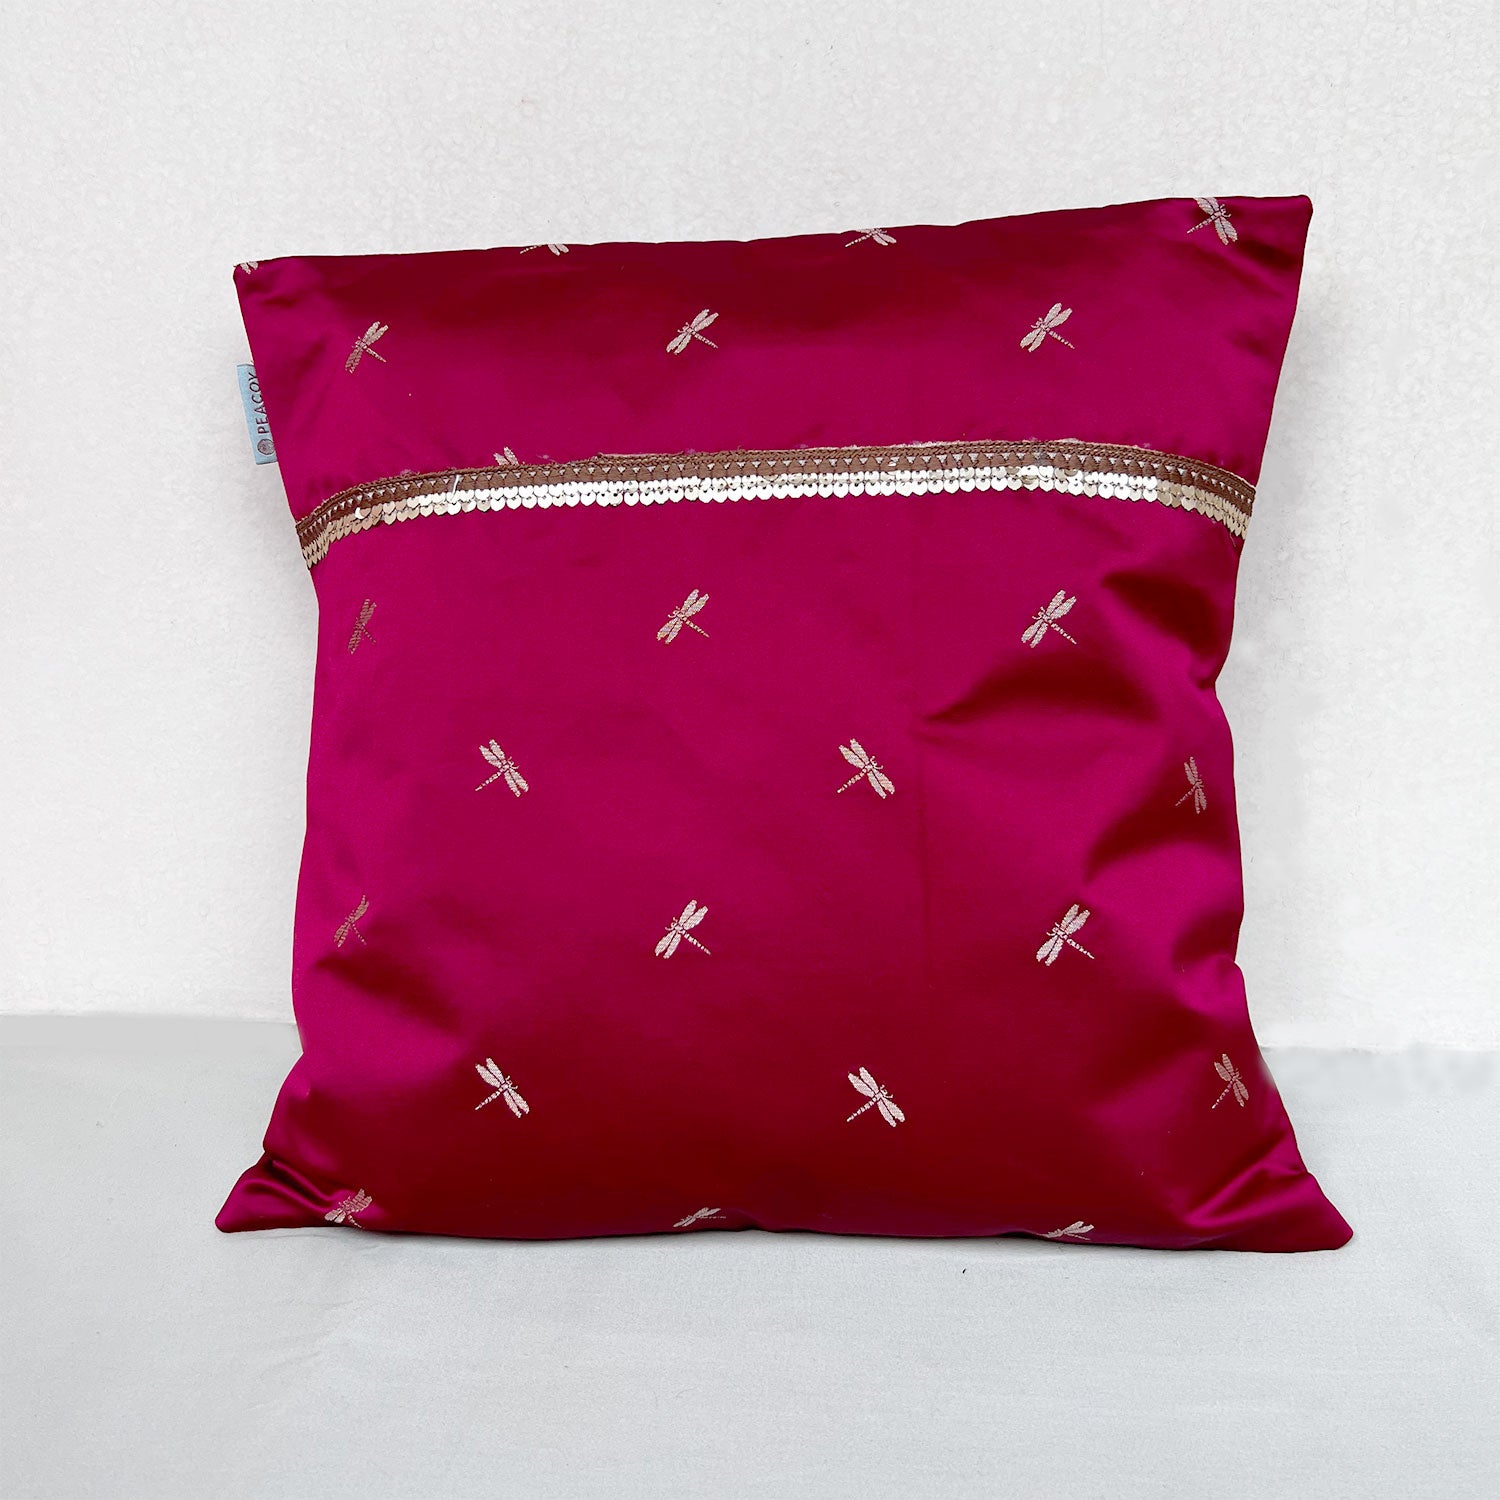 Authentic Maroon Red Cushion Cover - 16 x 16 inches | Heavy Silk Polyester with Pure Casement Cotton Back with Zipper